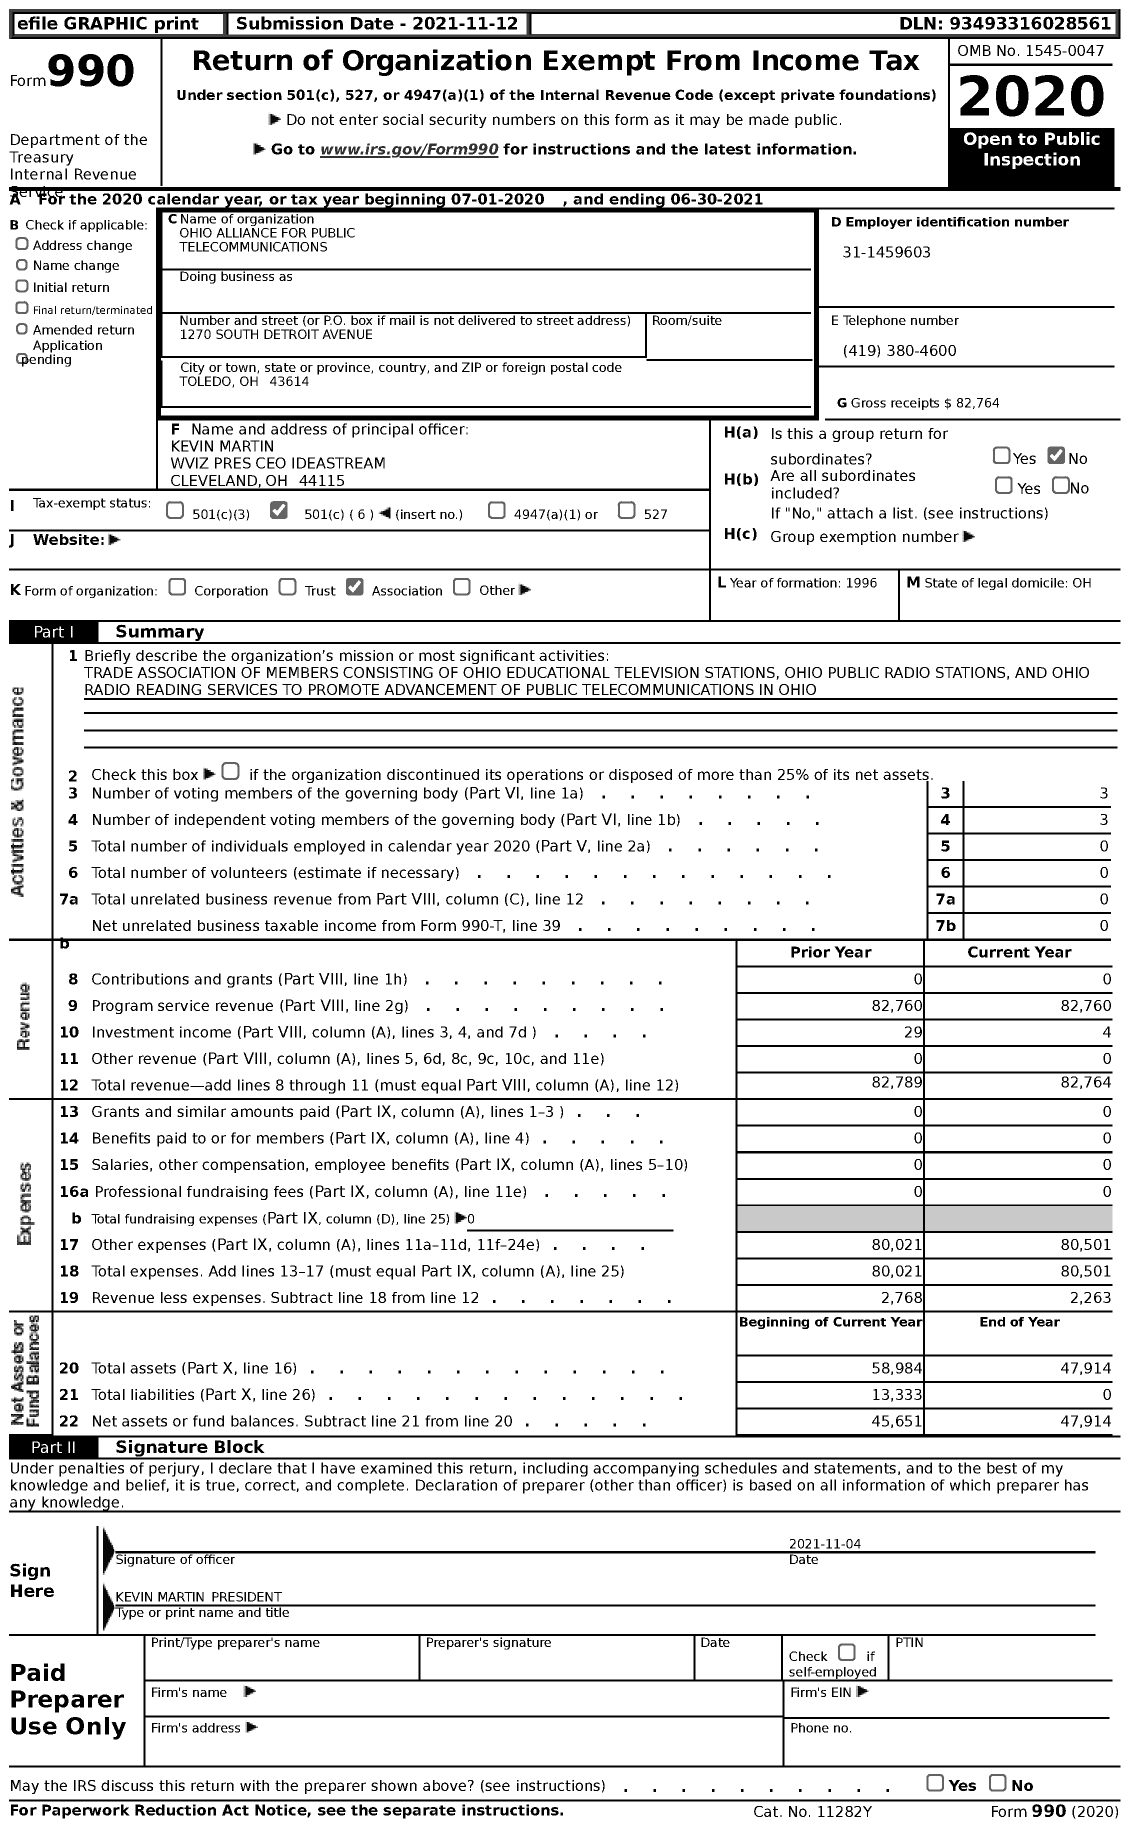 Image of first page of 2020 Form 990 for Ohio Alliance for Public Telecommunications